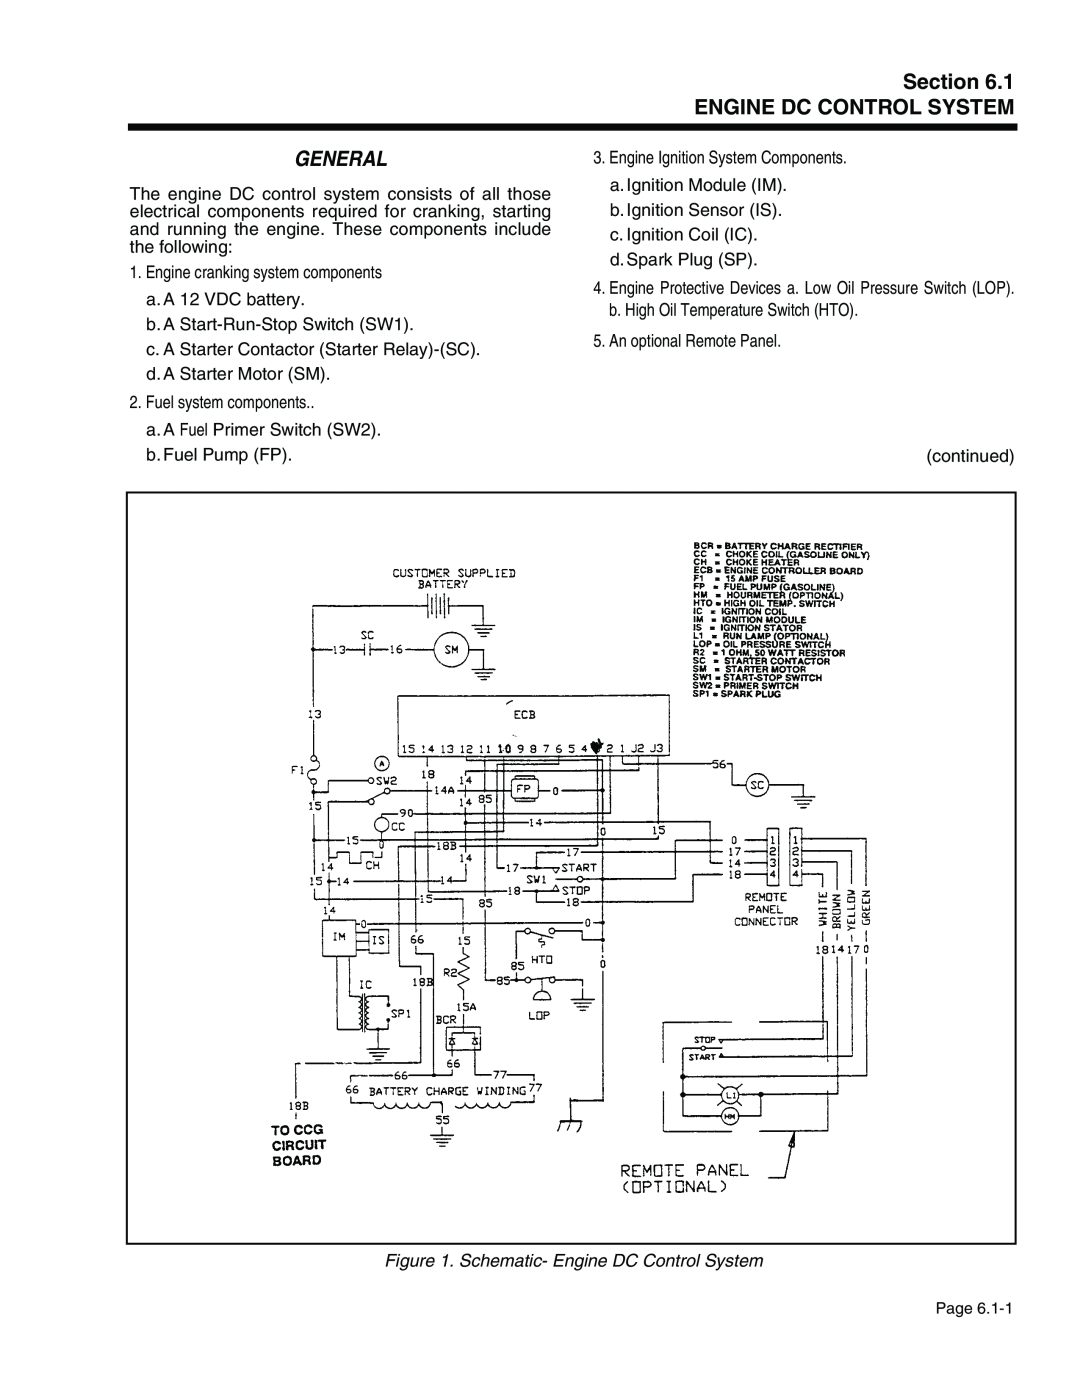 Generac Power Systems 941-2, 940-2 Section ENGINE DC CONTROL SYSTEM, Schematic- Engine DC Control System, General 